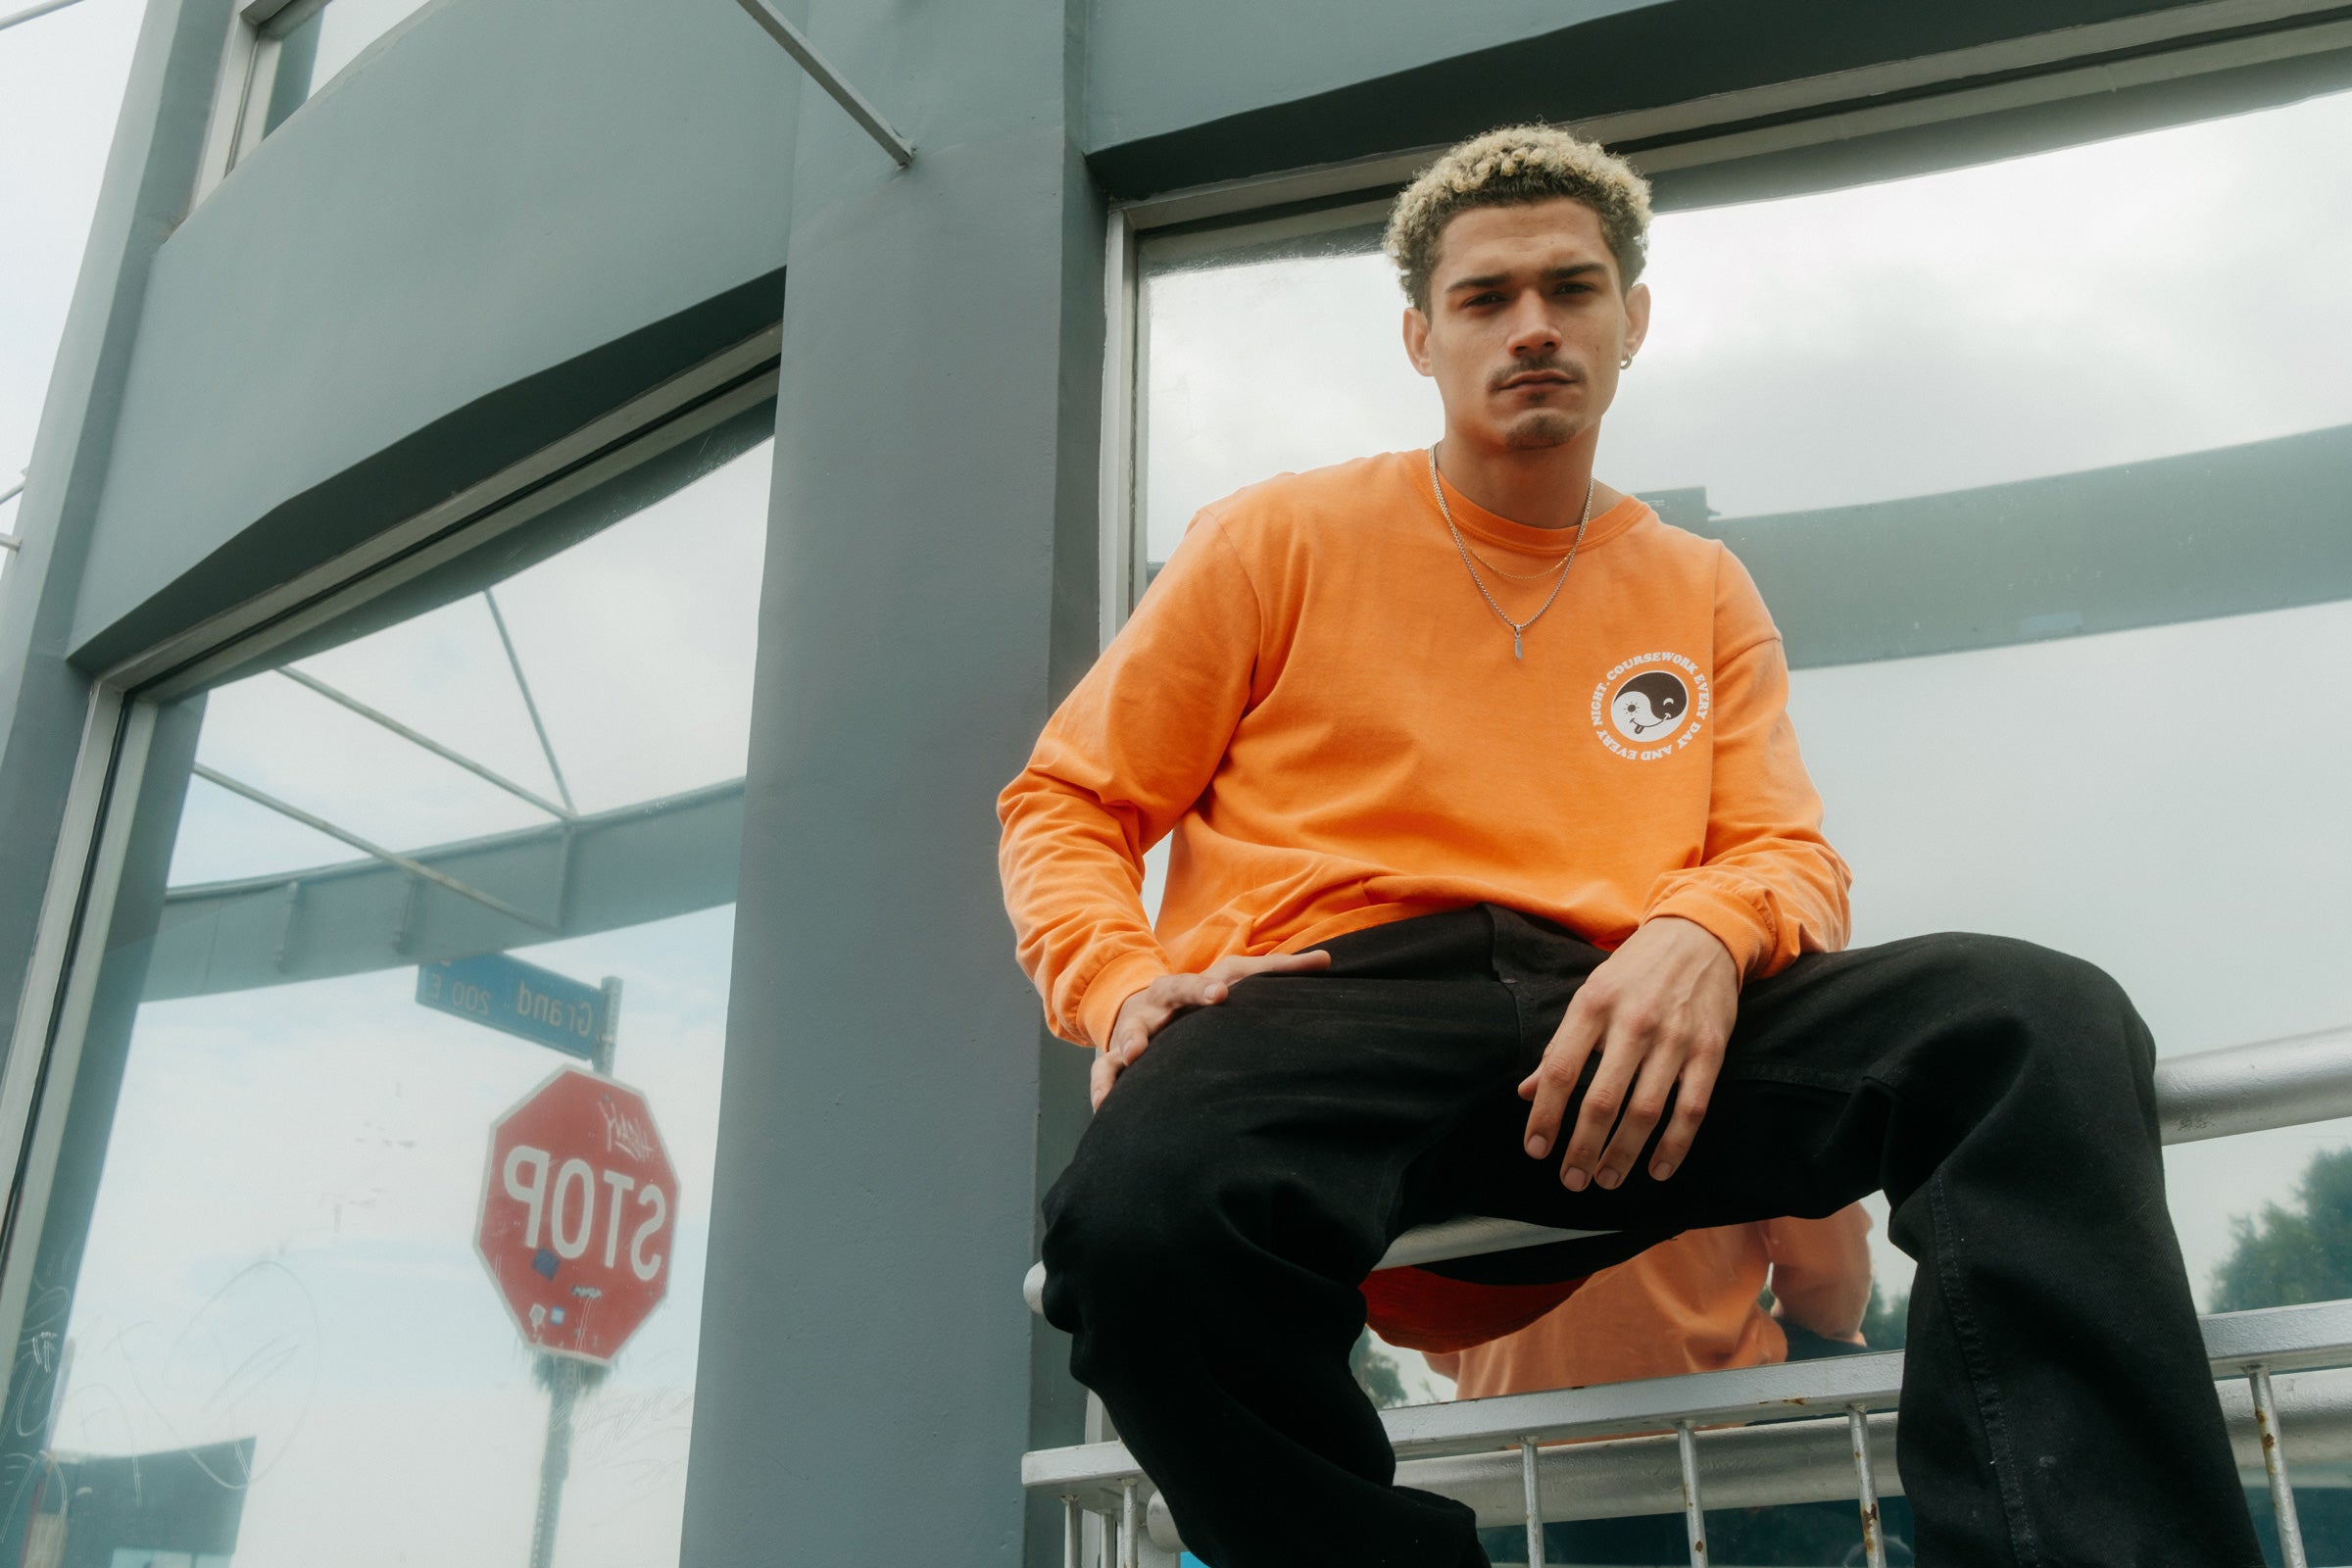 Model wearing the Day and Night Long Sleeve Tee in orange and sitting on a handrail.